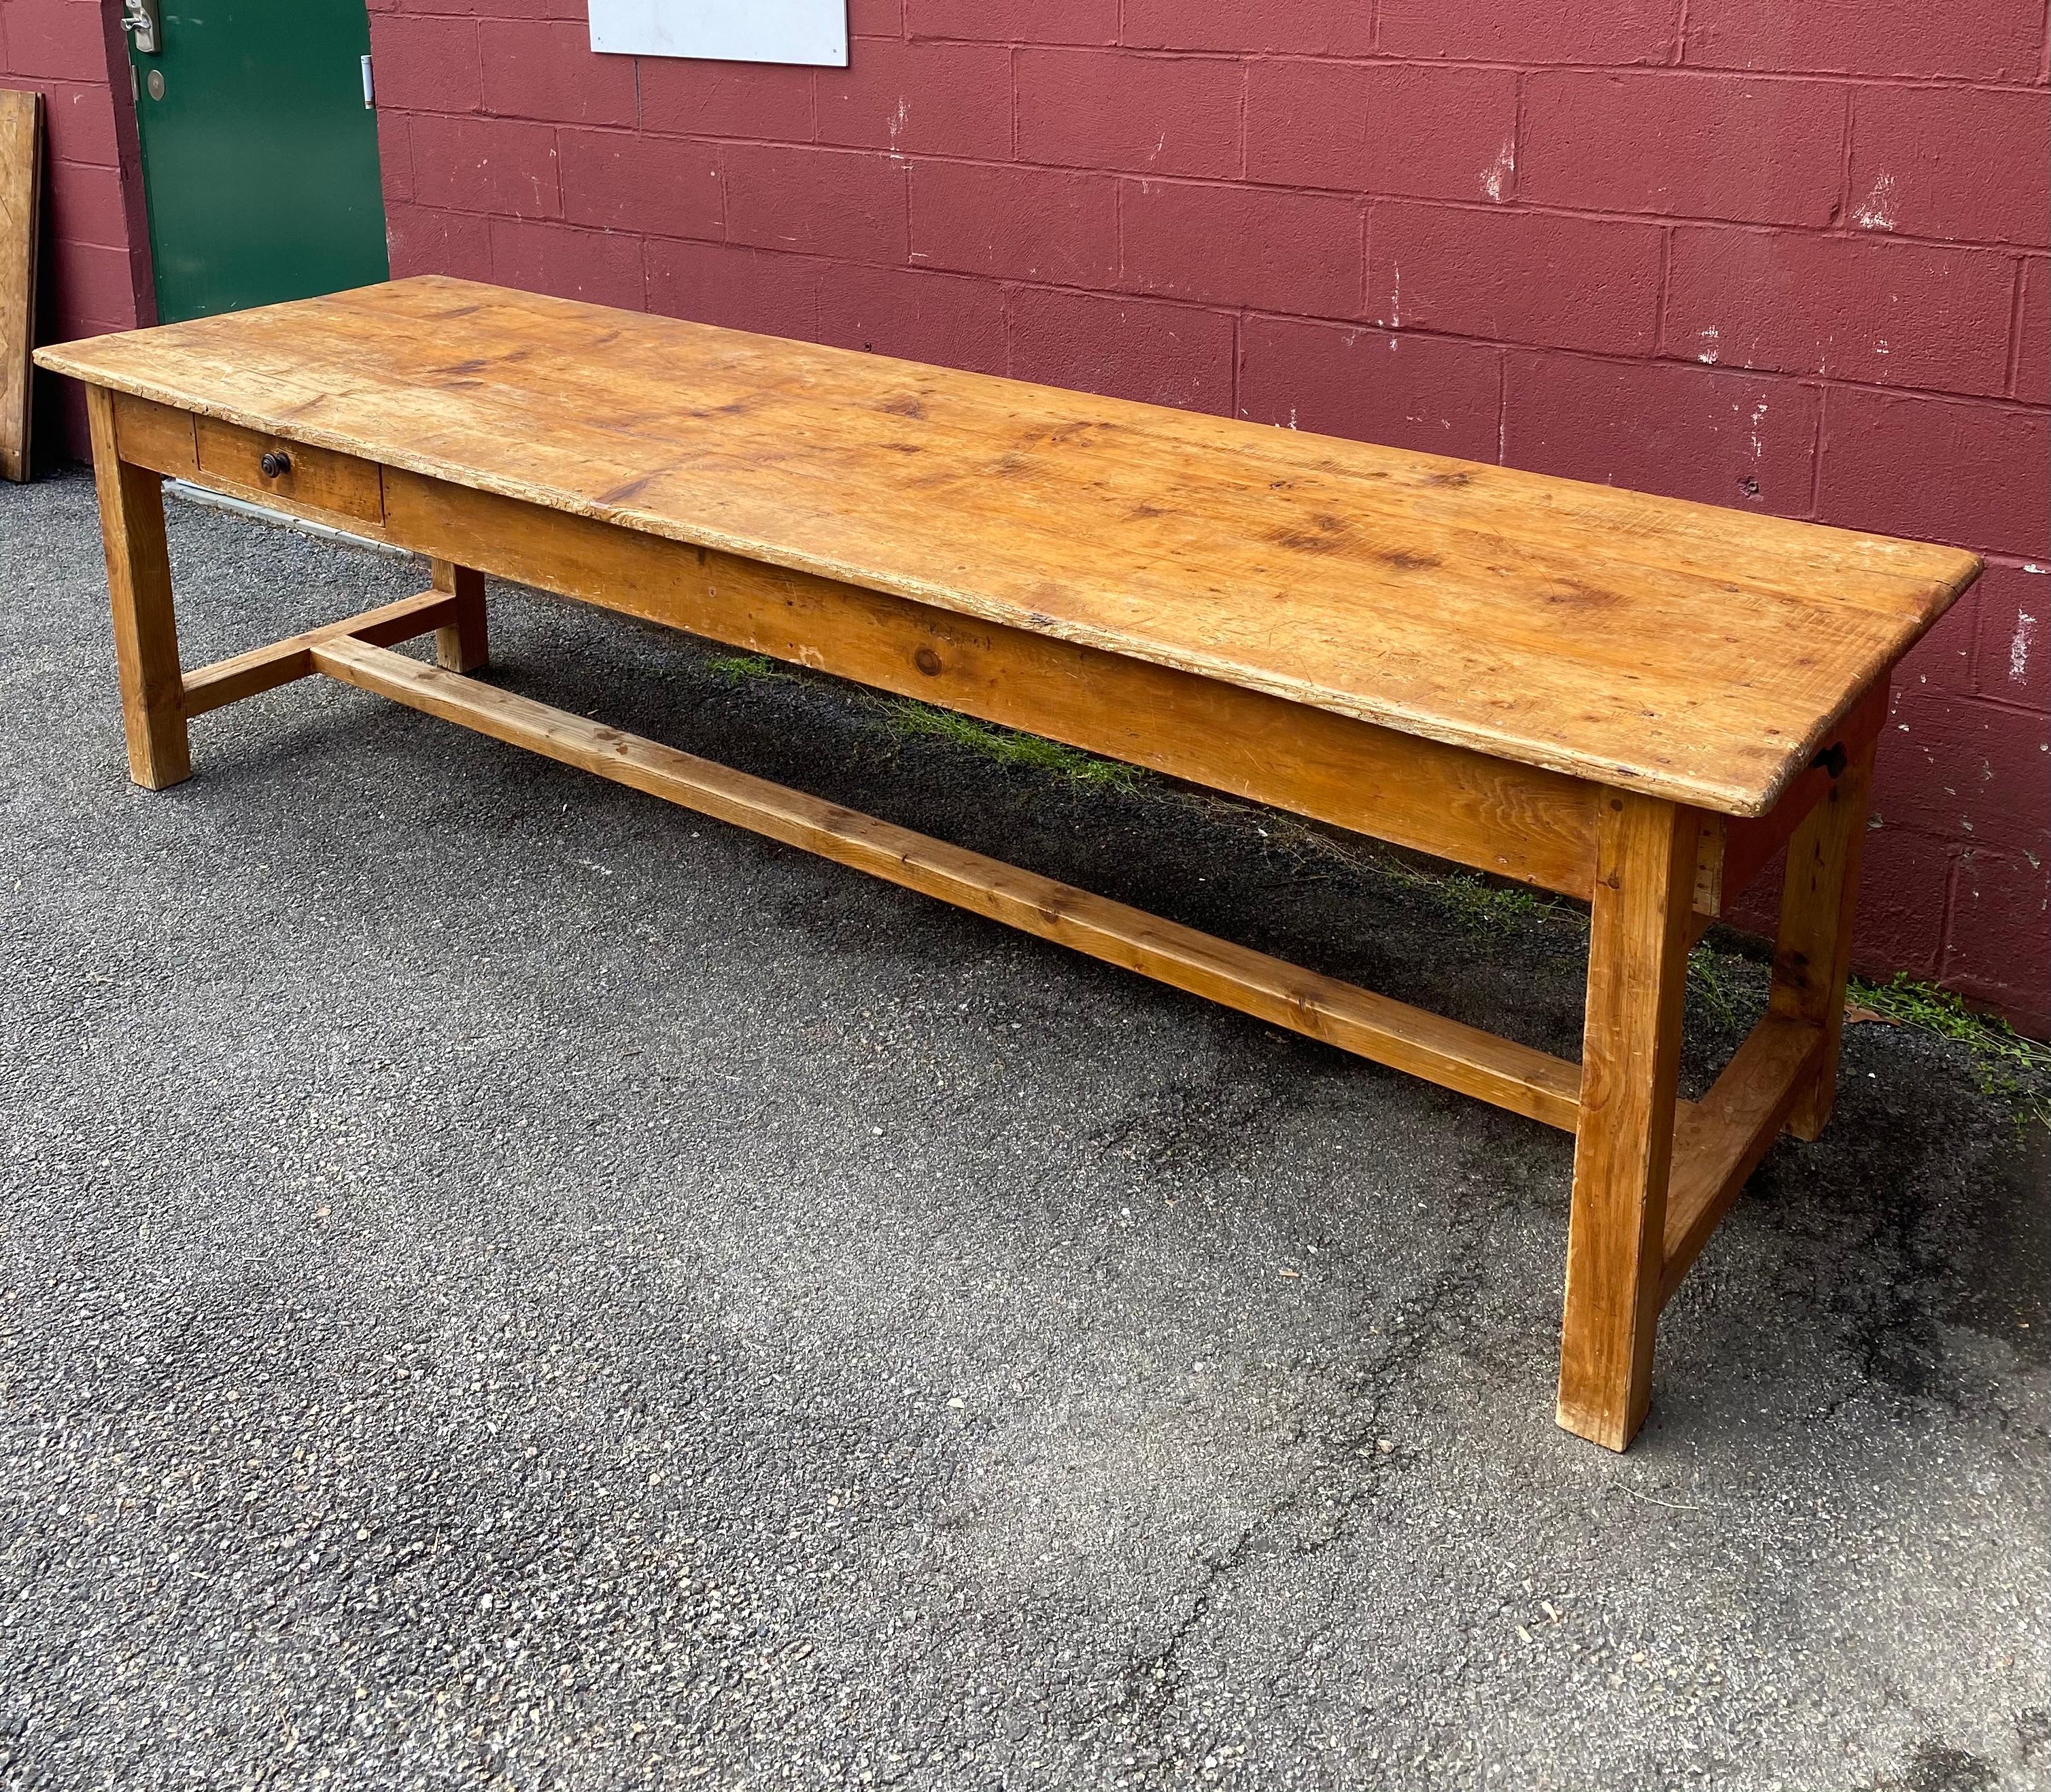 Very large and massive work table made of sold pine. The table top is 3 solid planks each 113” long that shows years of use in a rich natural patina. The top is mounted on squared legs and a matching stretcher. There are 2 drawers, a very large one